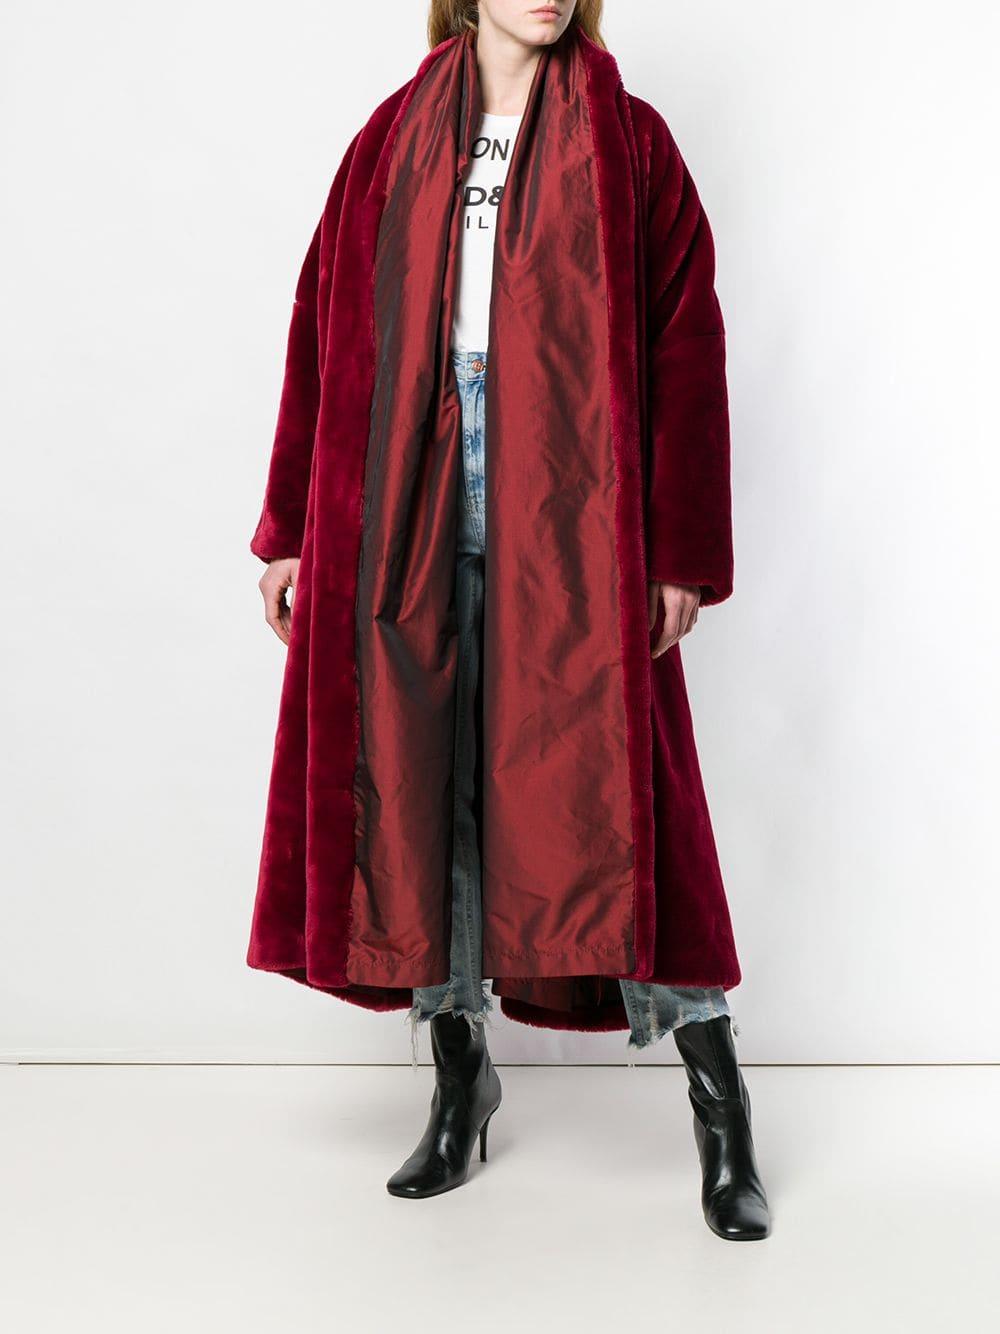 Dolce & Gabbana bordeaux cotton blend fluffy faux fur oversize coat, featuring a high standing collar, long sleeves and an open front. Fully lined in eye-catchingshantung effect bordeaux fabric.

Years: 90s

Made in Italy

Size: 42 IT

Linear